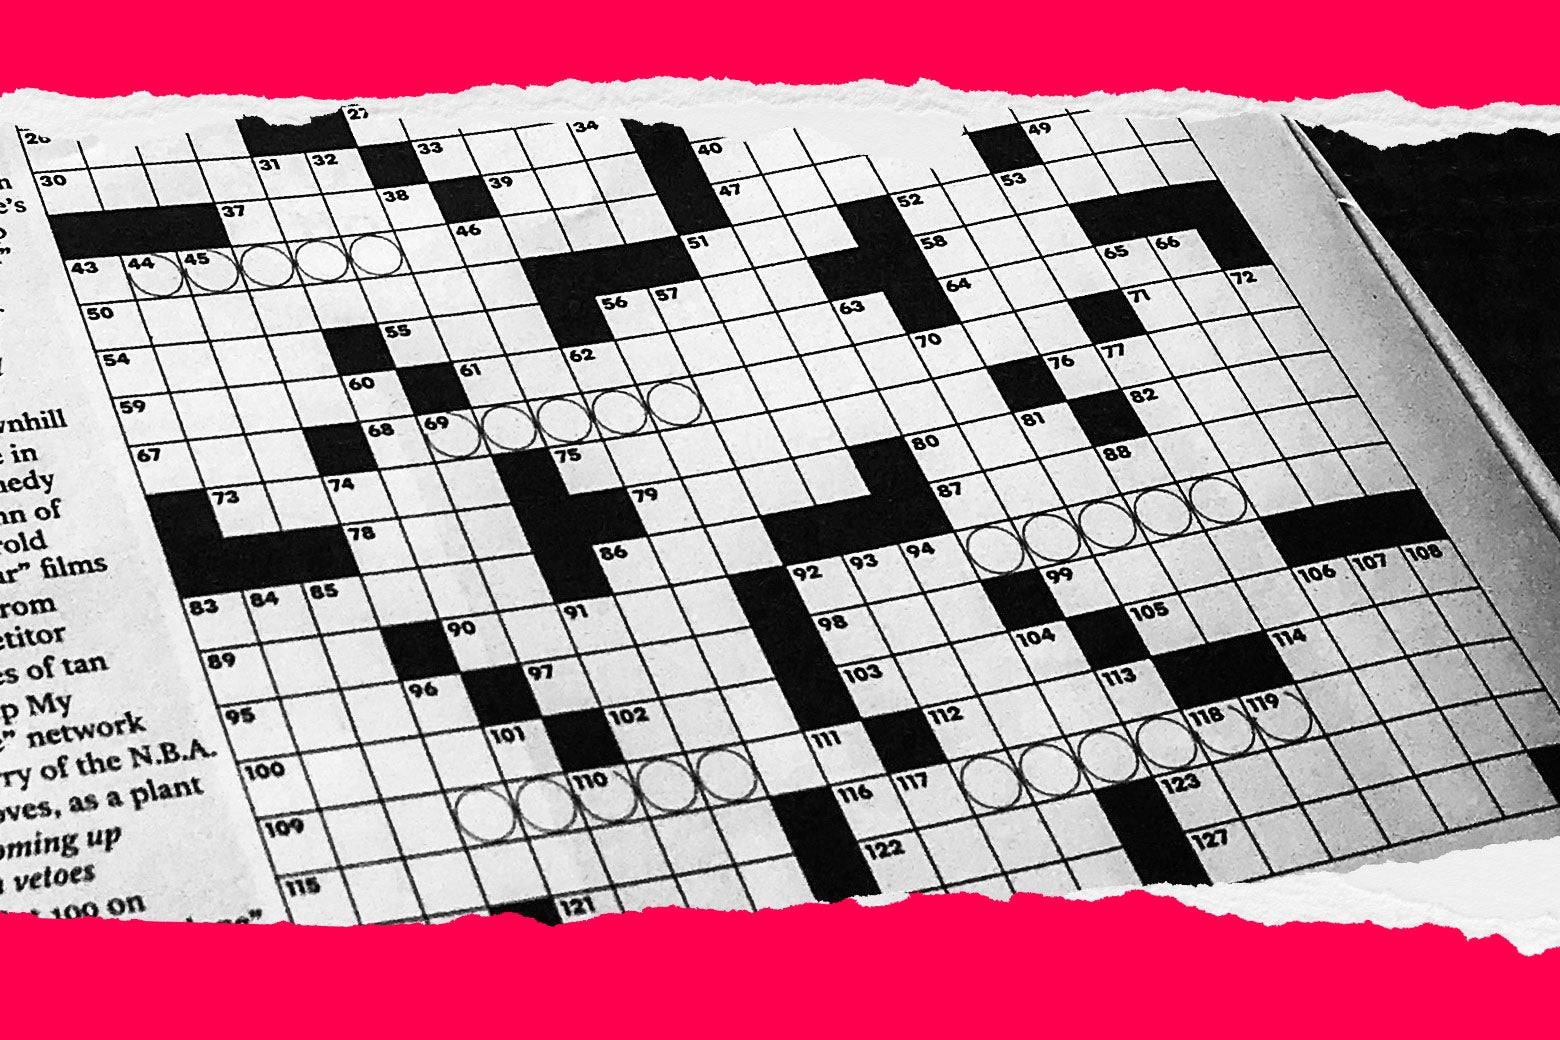 nytimes crossword puzzle 0226 answers